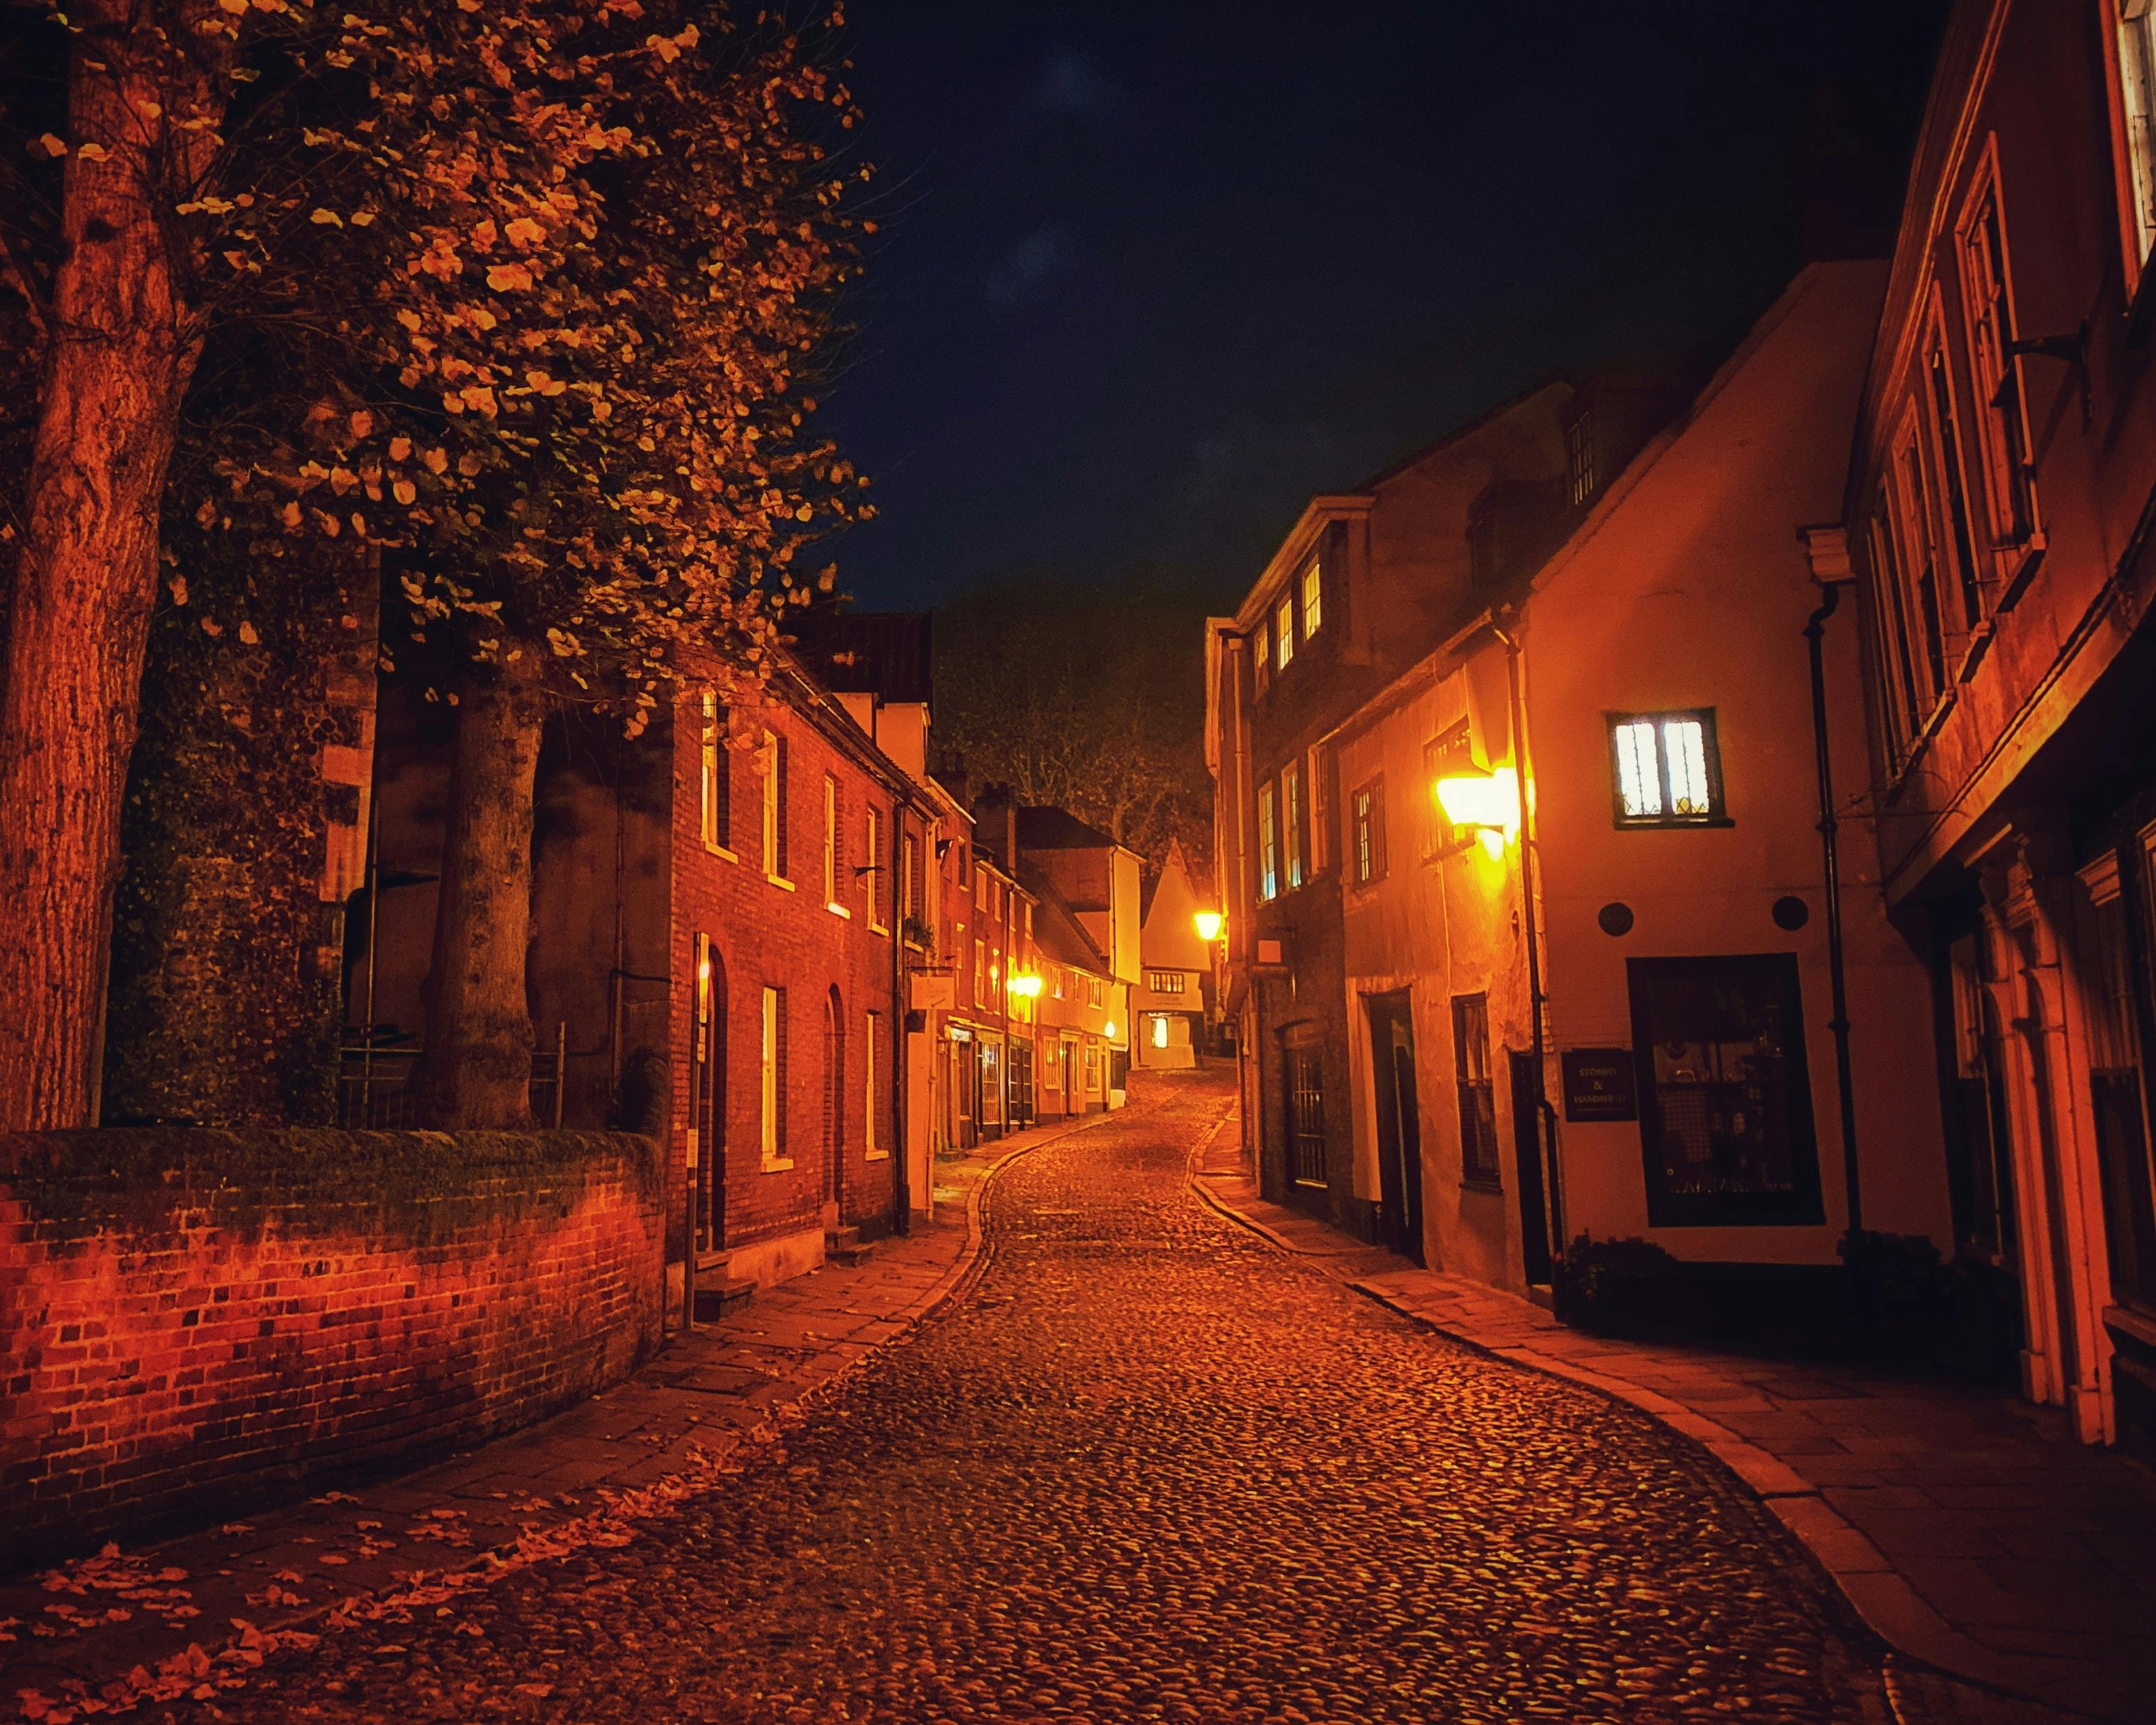 Photograph of Norwich at night.